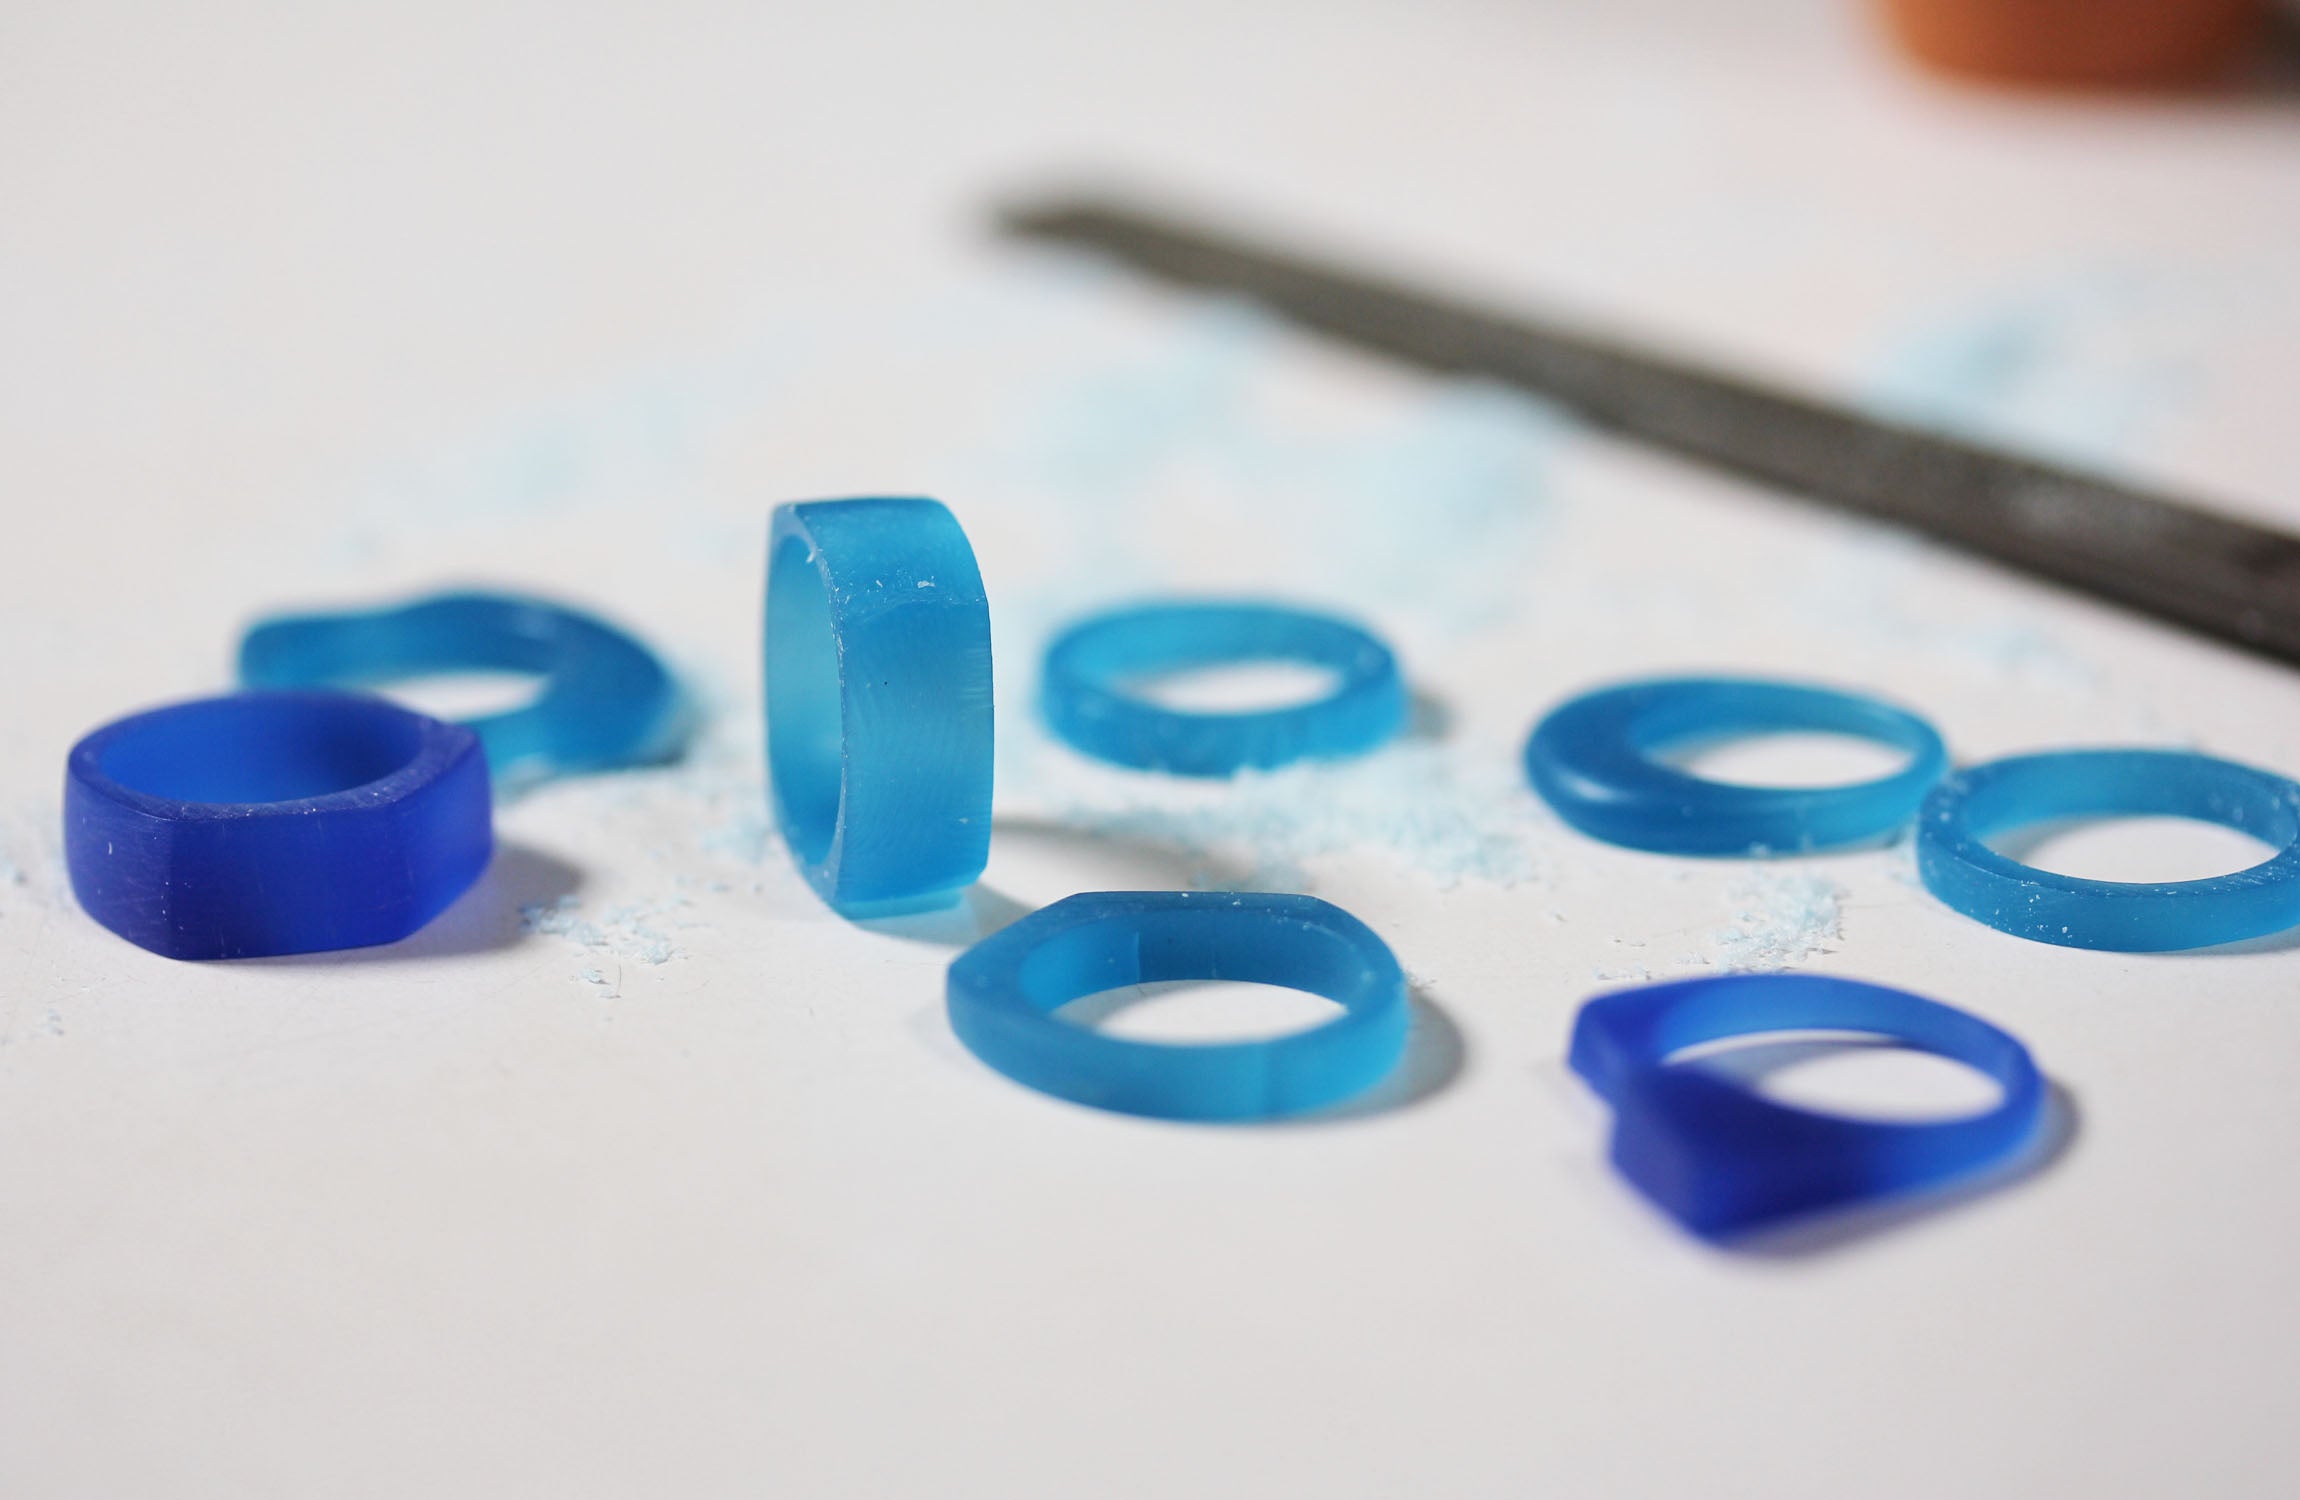 Refill Kit - Carve Your Own Ring